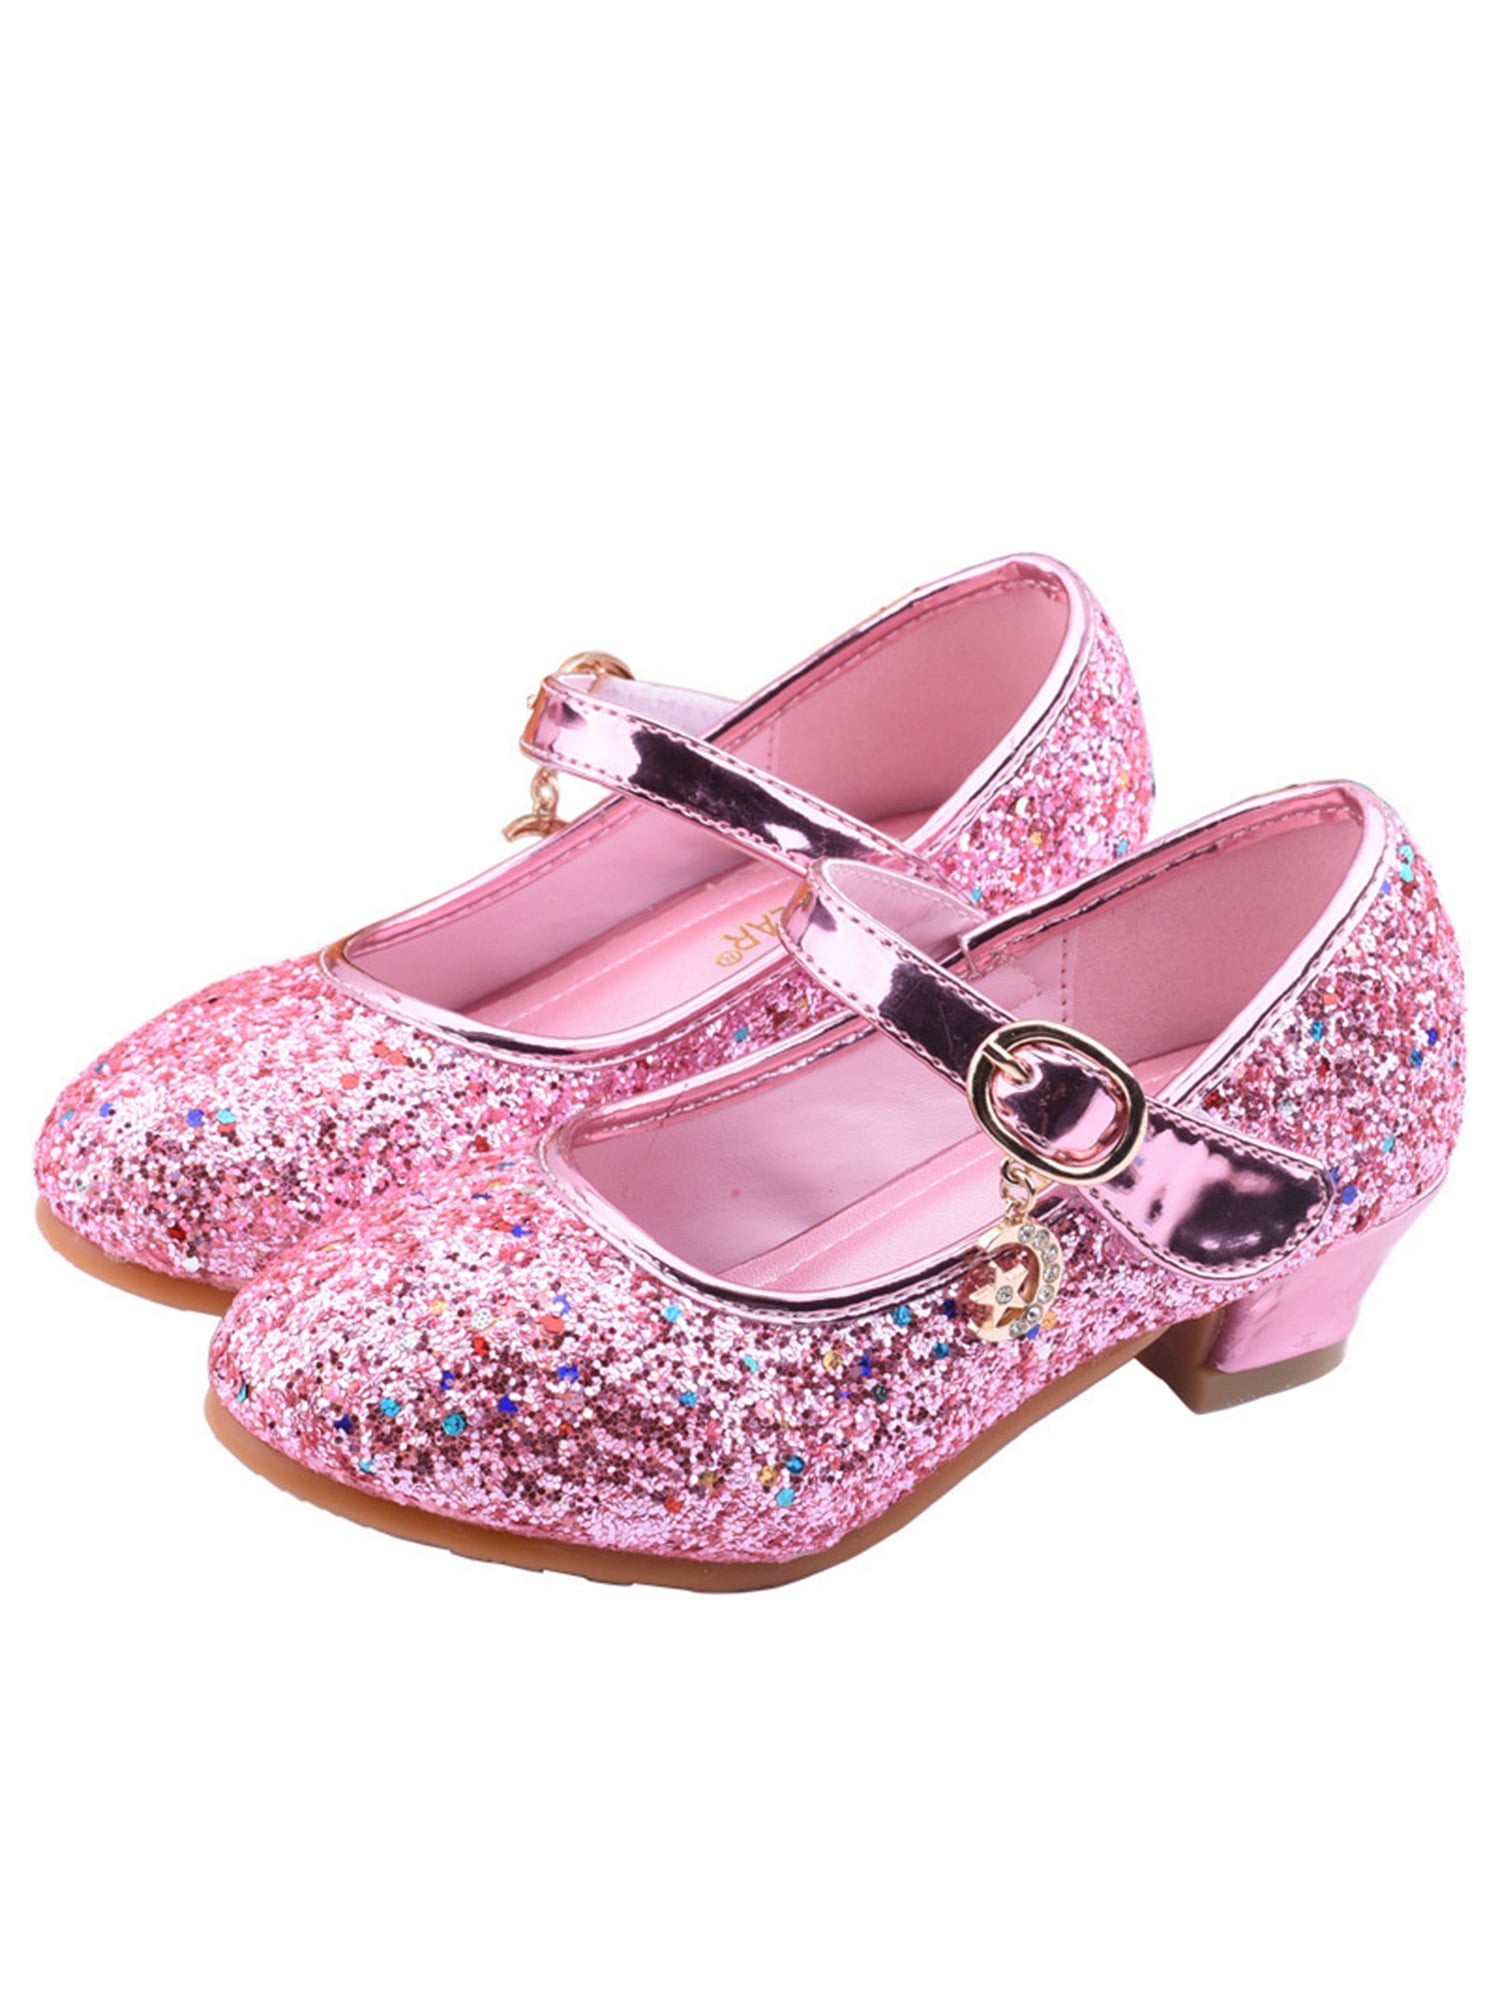 Shoes Girls Shoes Heels little girl dress up costume shoes,cosplay shoes bling shoes for girls rhinestone toddler shoes Kids heels princess shoes,sparkly shoes 